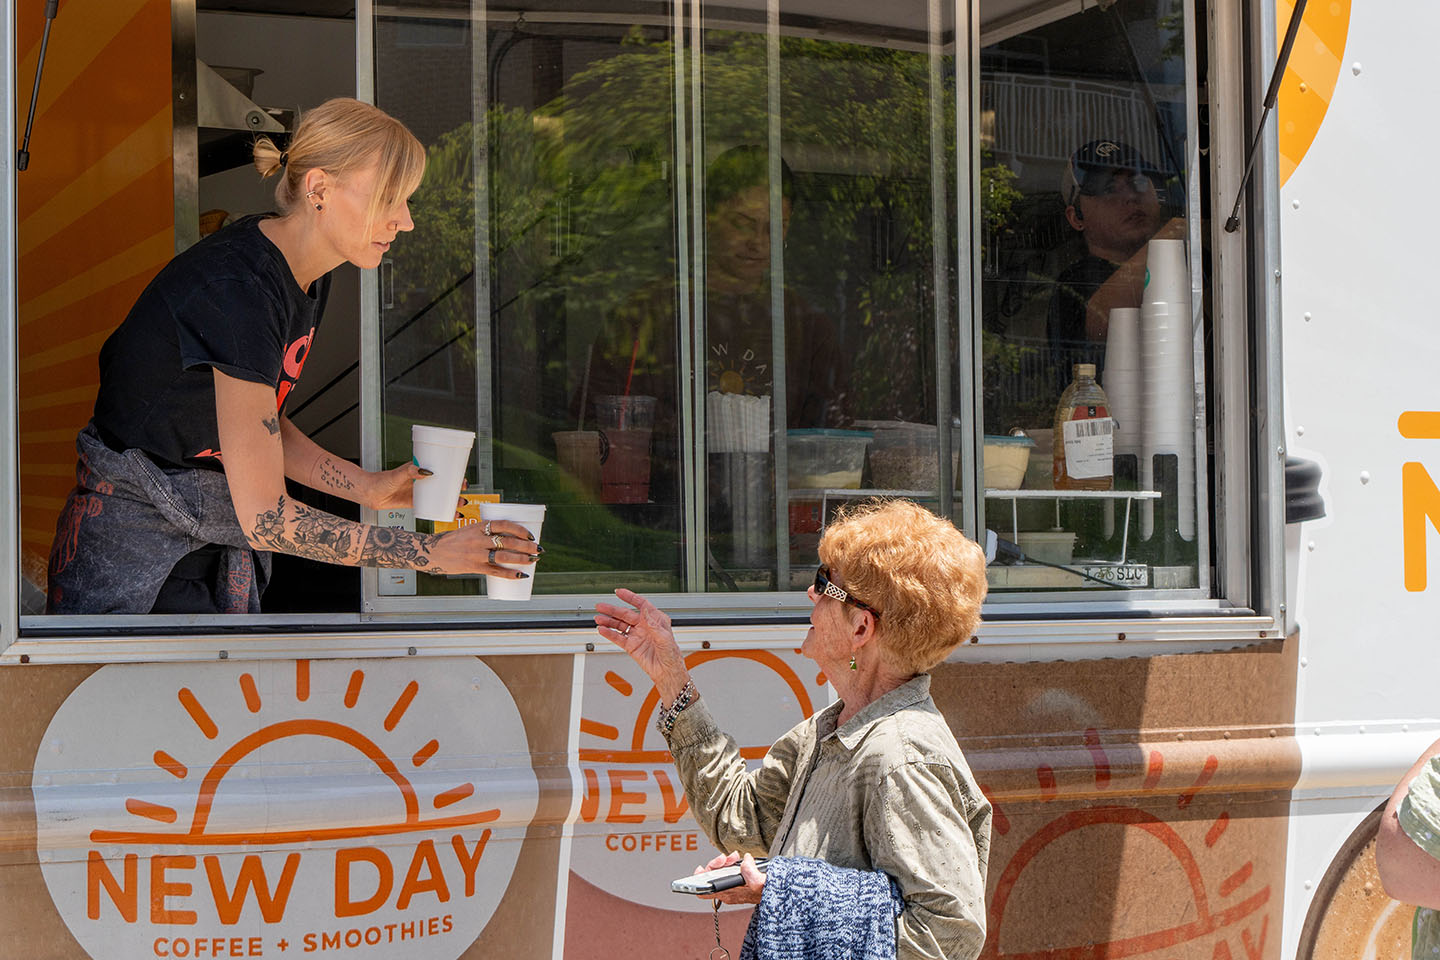  A senior woman orders a smoothie from a food truck.